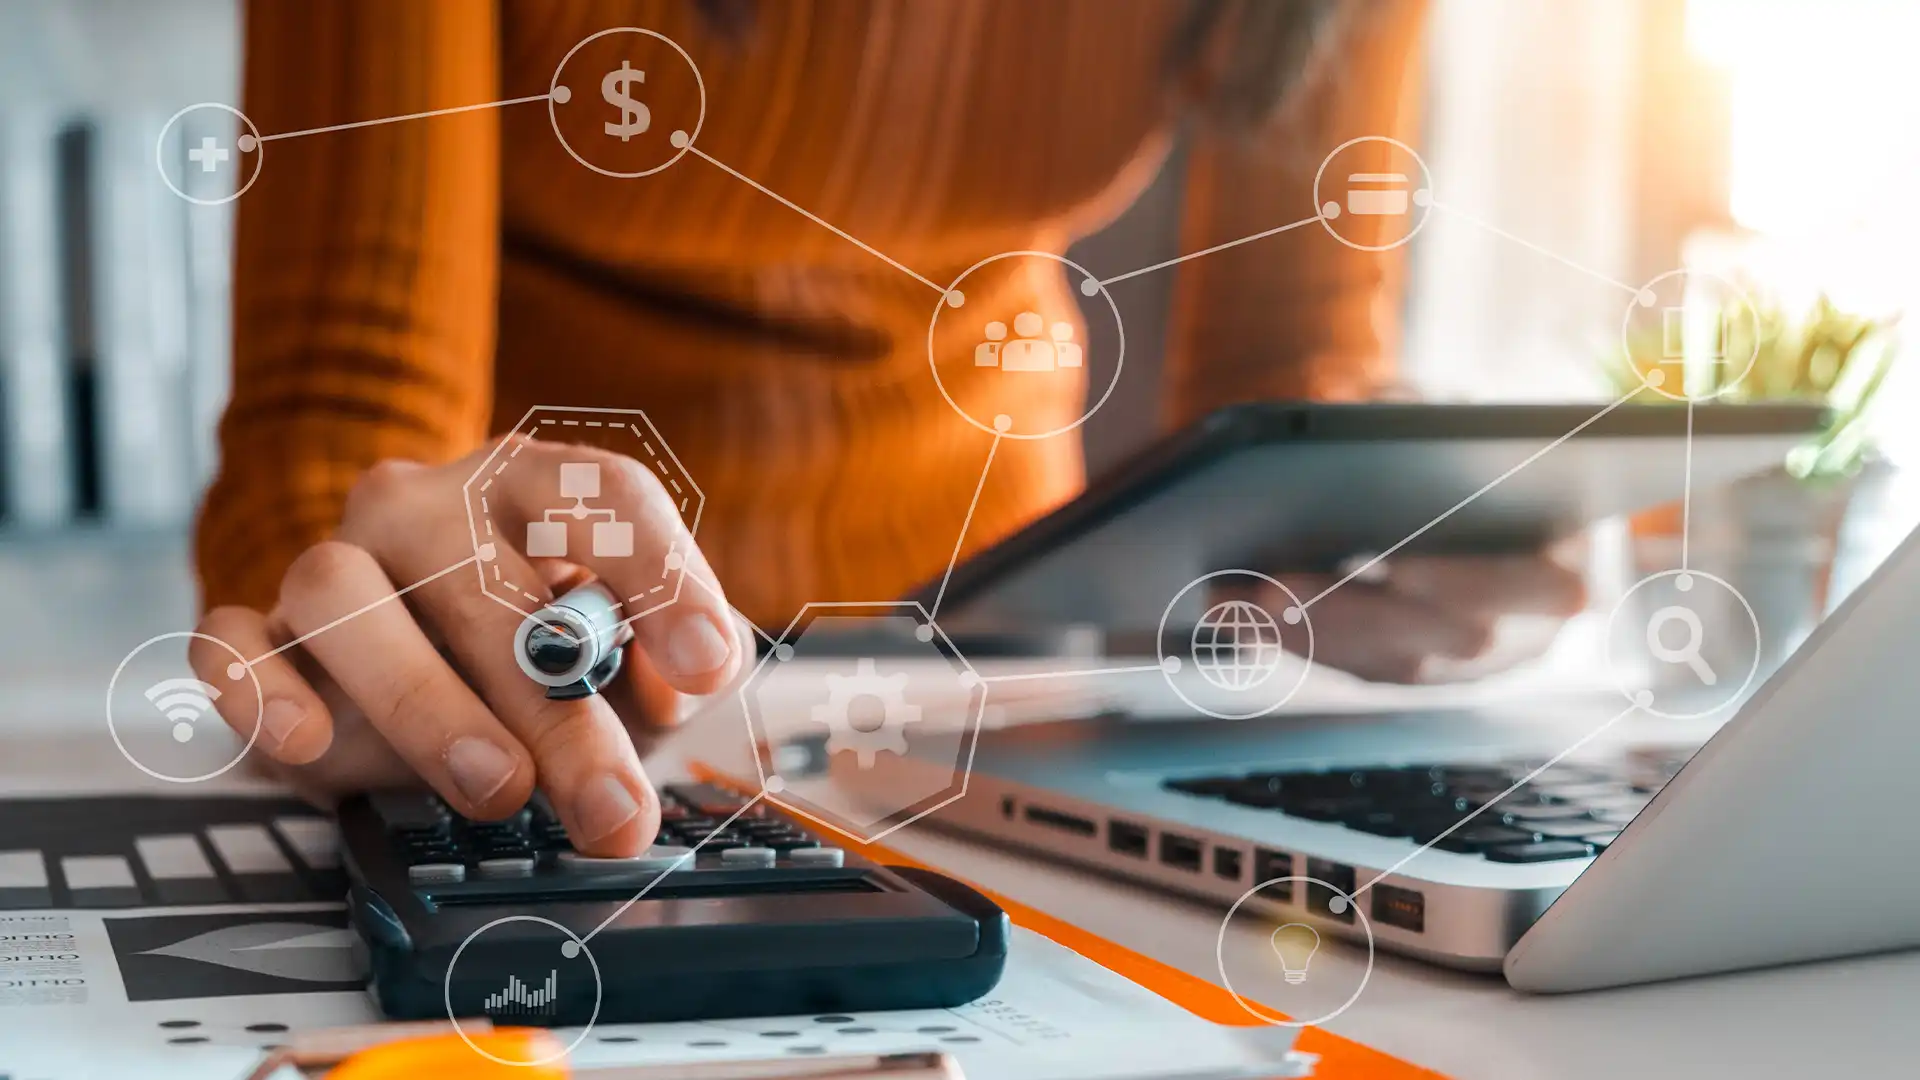 Business professional using a calculator and laptop to strategize on mobility expense management, surrounded by digital icons representing wireless networks, budgeting, and global connectivity, emphasizing Prudent's expertise in efficient mobility cost control.